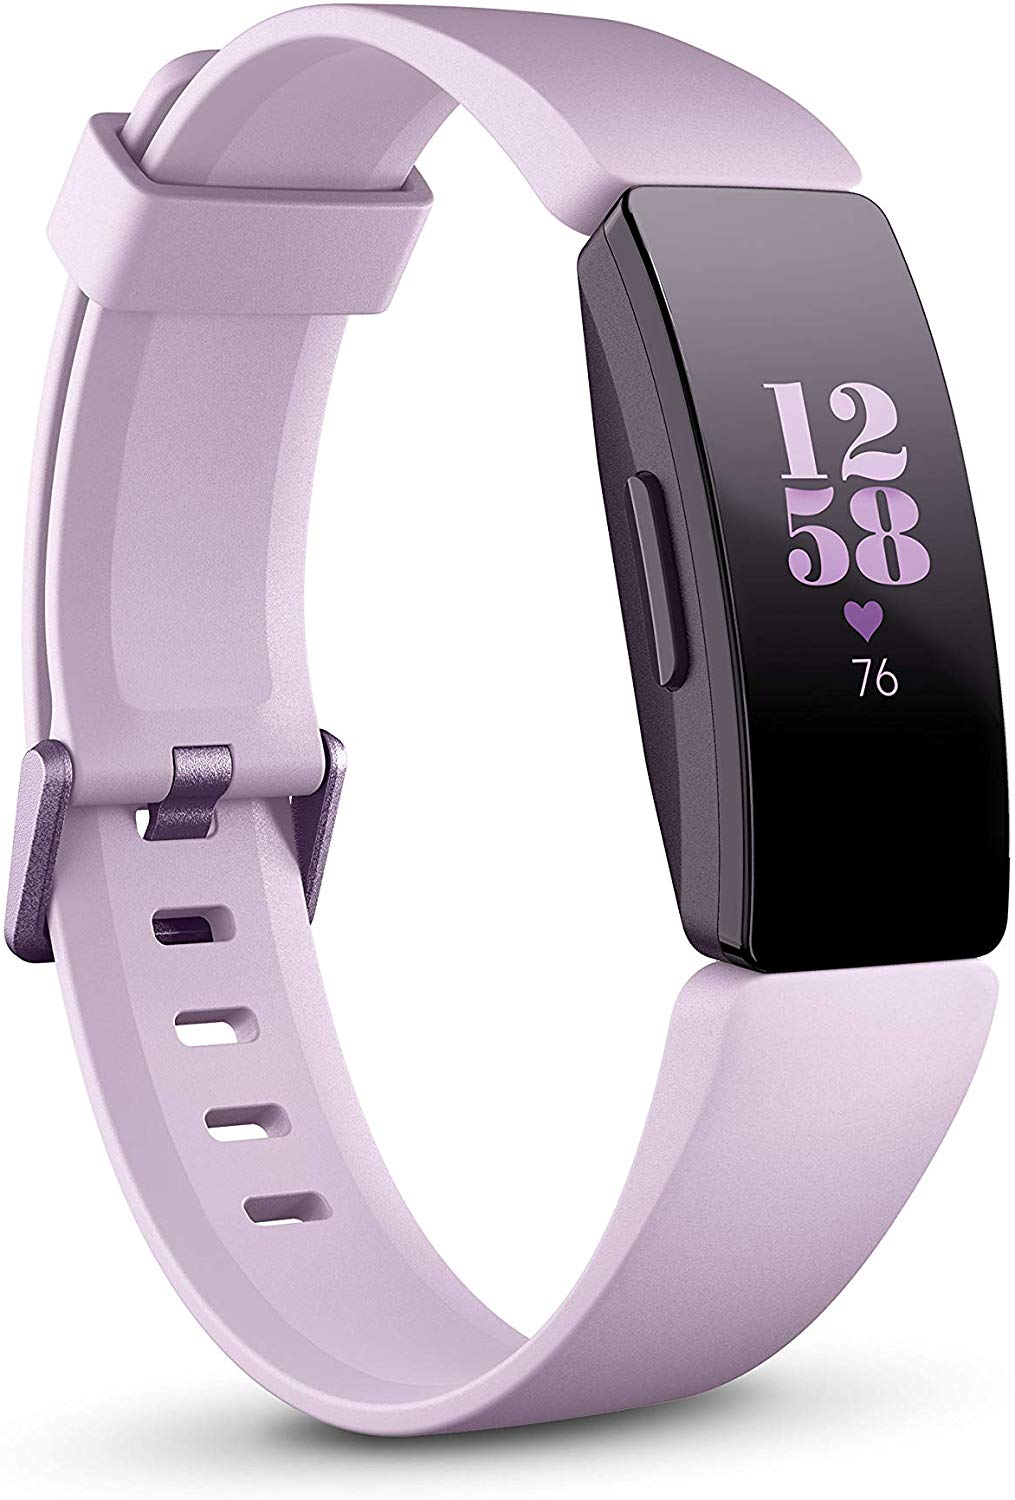 Fitbit Inspire HR Specifications, Features and Price - Geeky Wrist